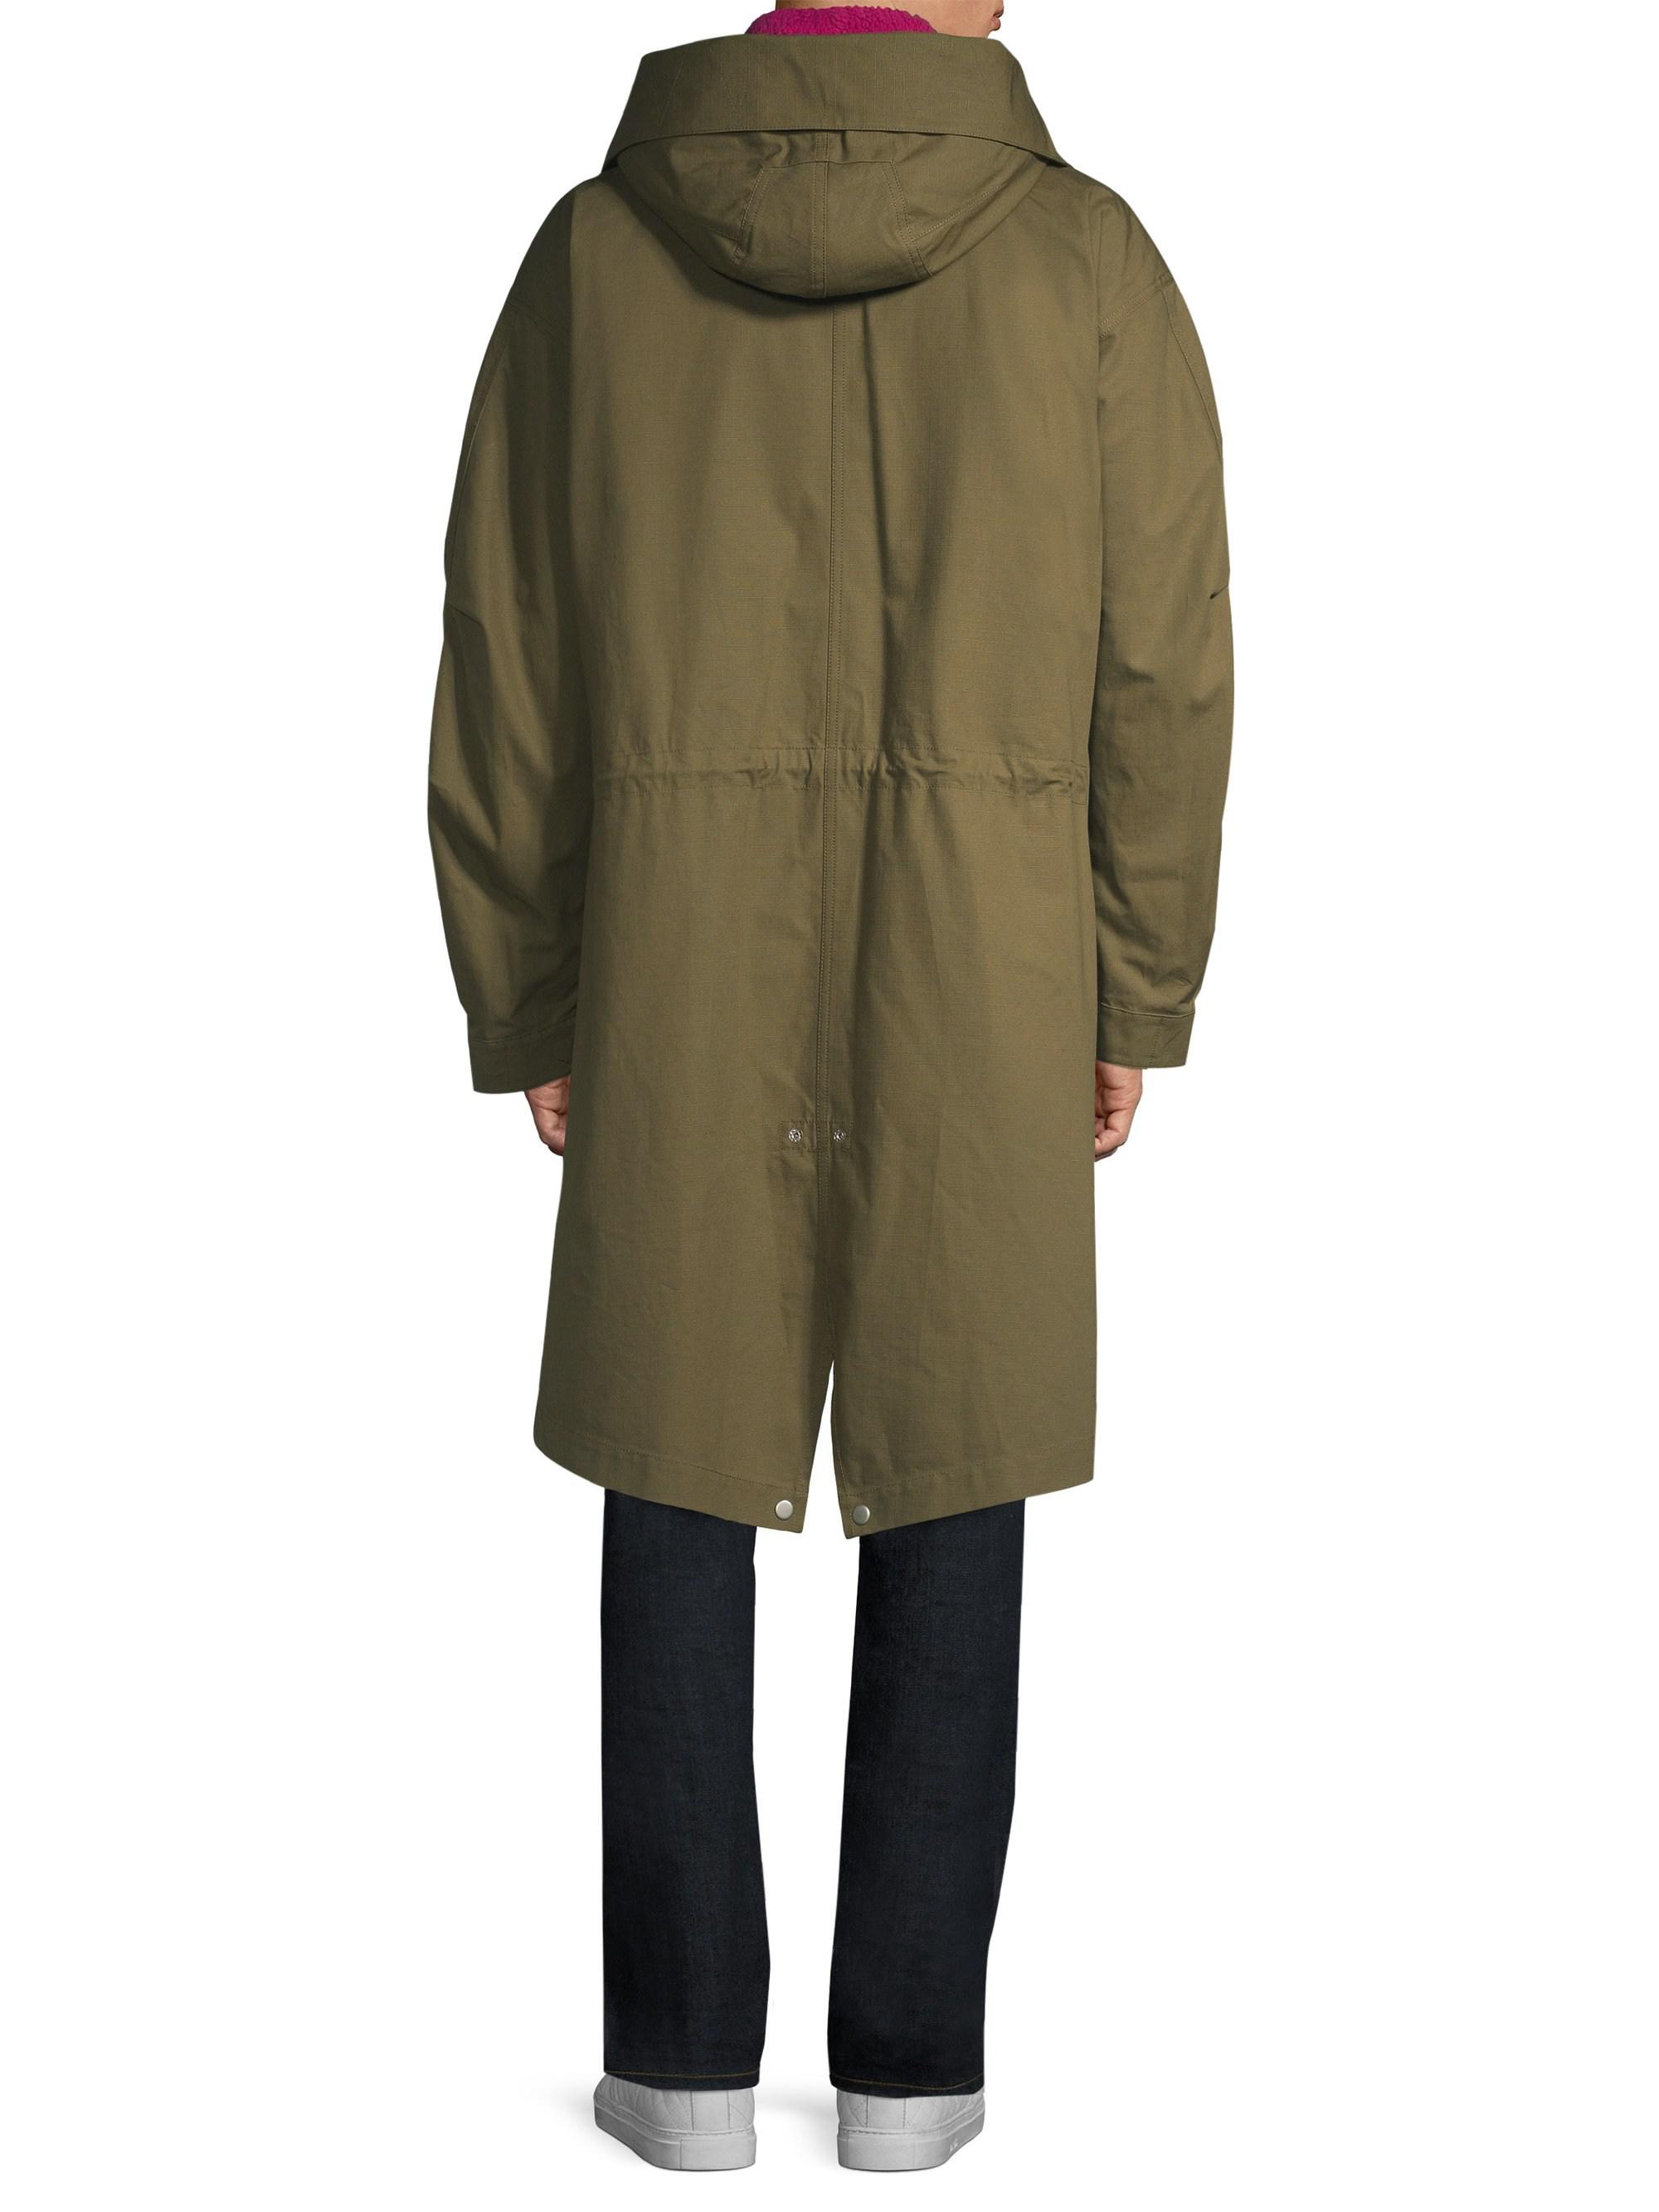 Helmut Lang Cotton Ripstop Fishtail Parka in Olive (Green) for Men - Lyst